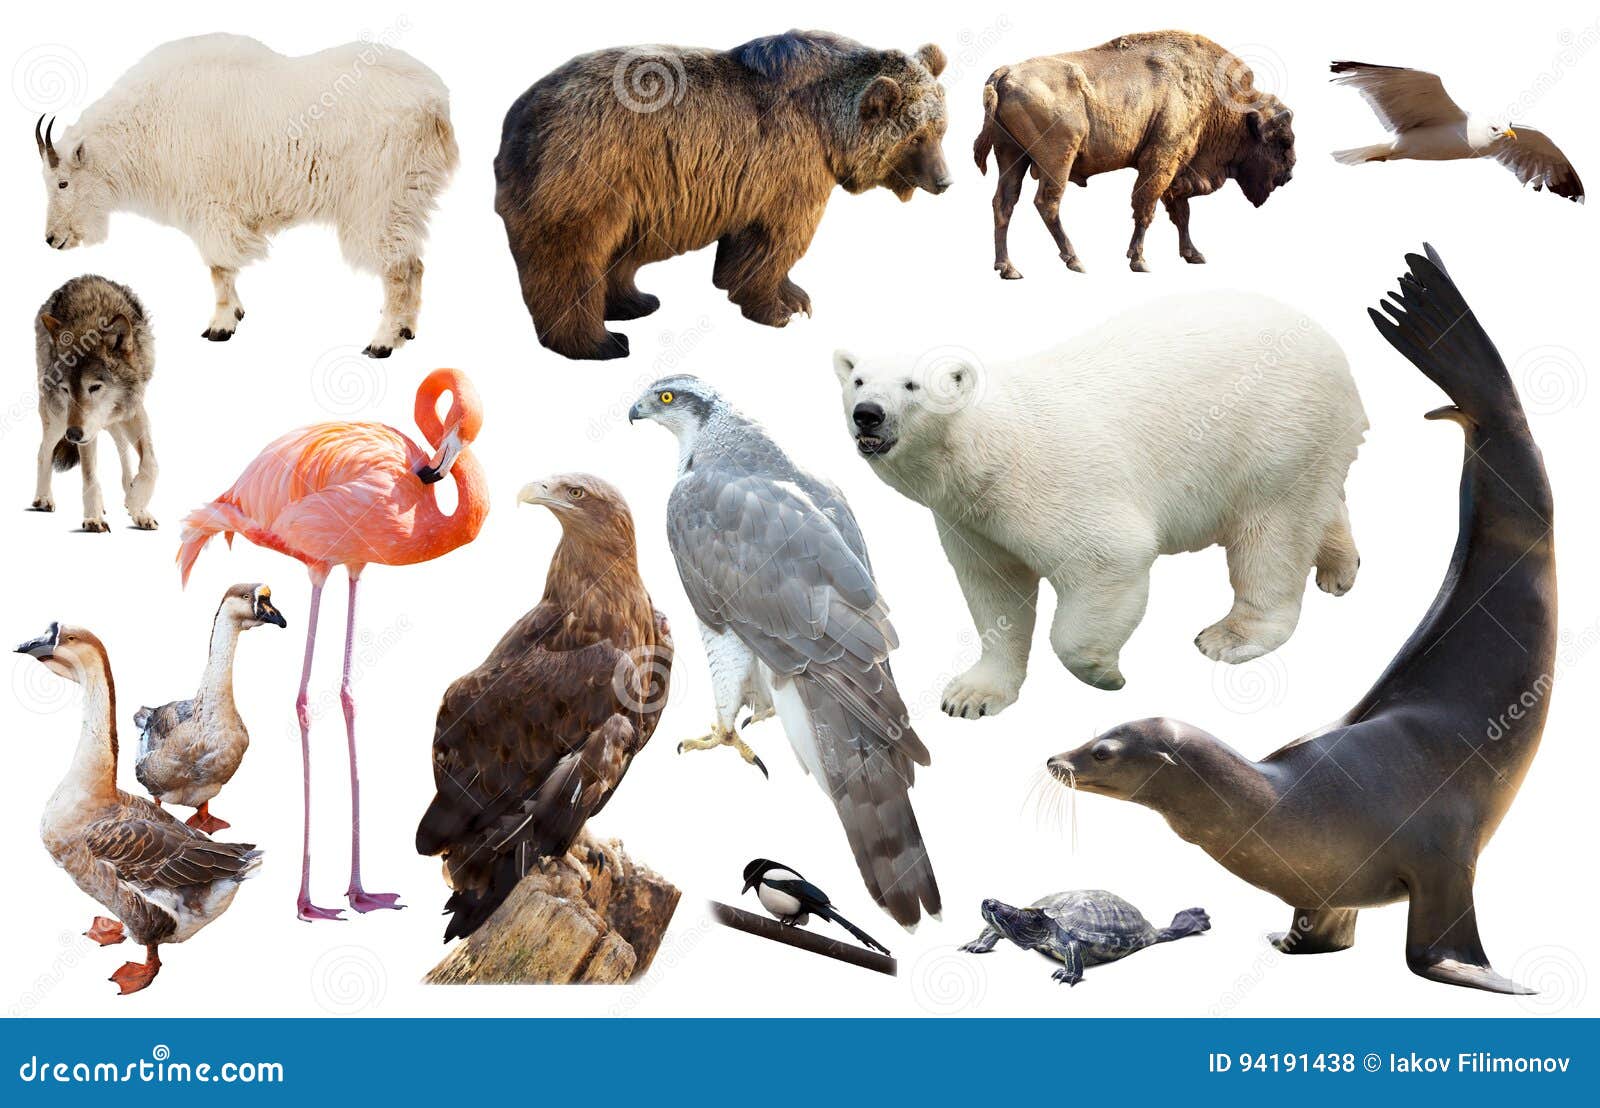 5,548 North American Wild Animals Stock Photos - Free & Royalty-Free Stock  Photos from Dreamstime